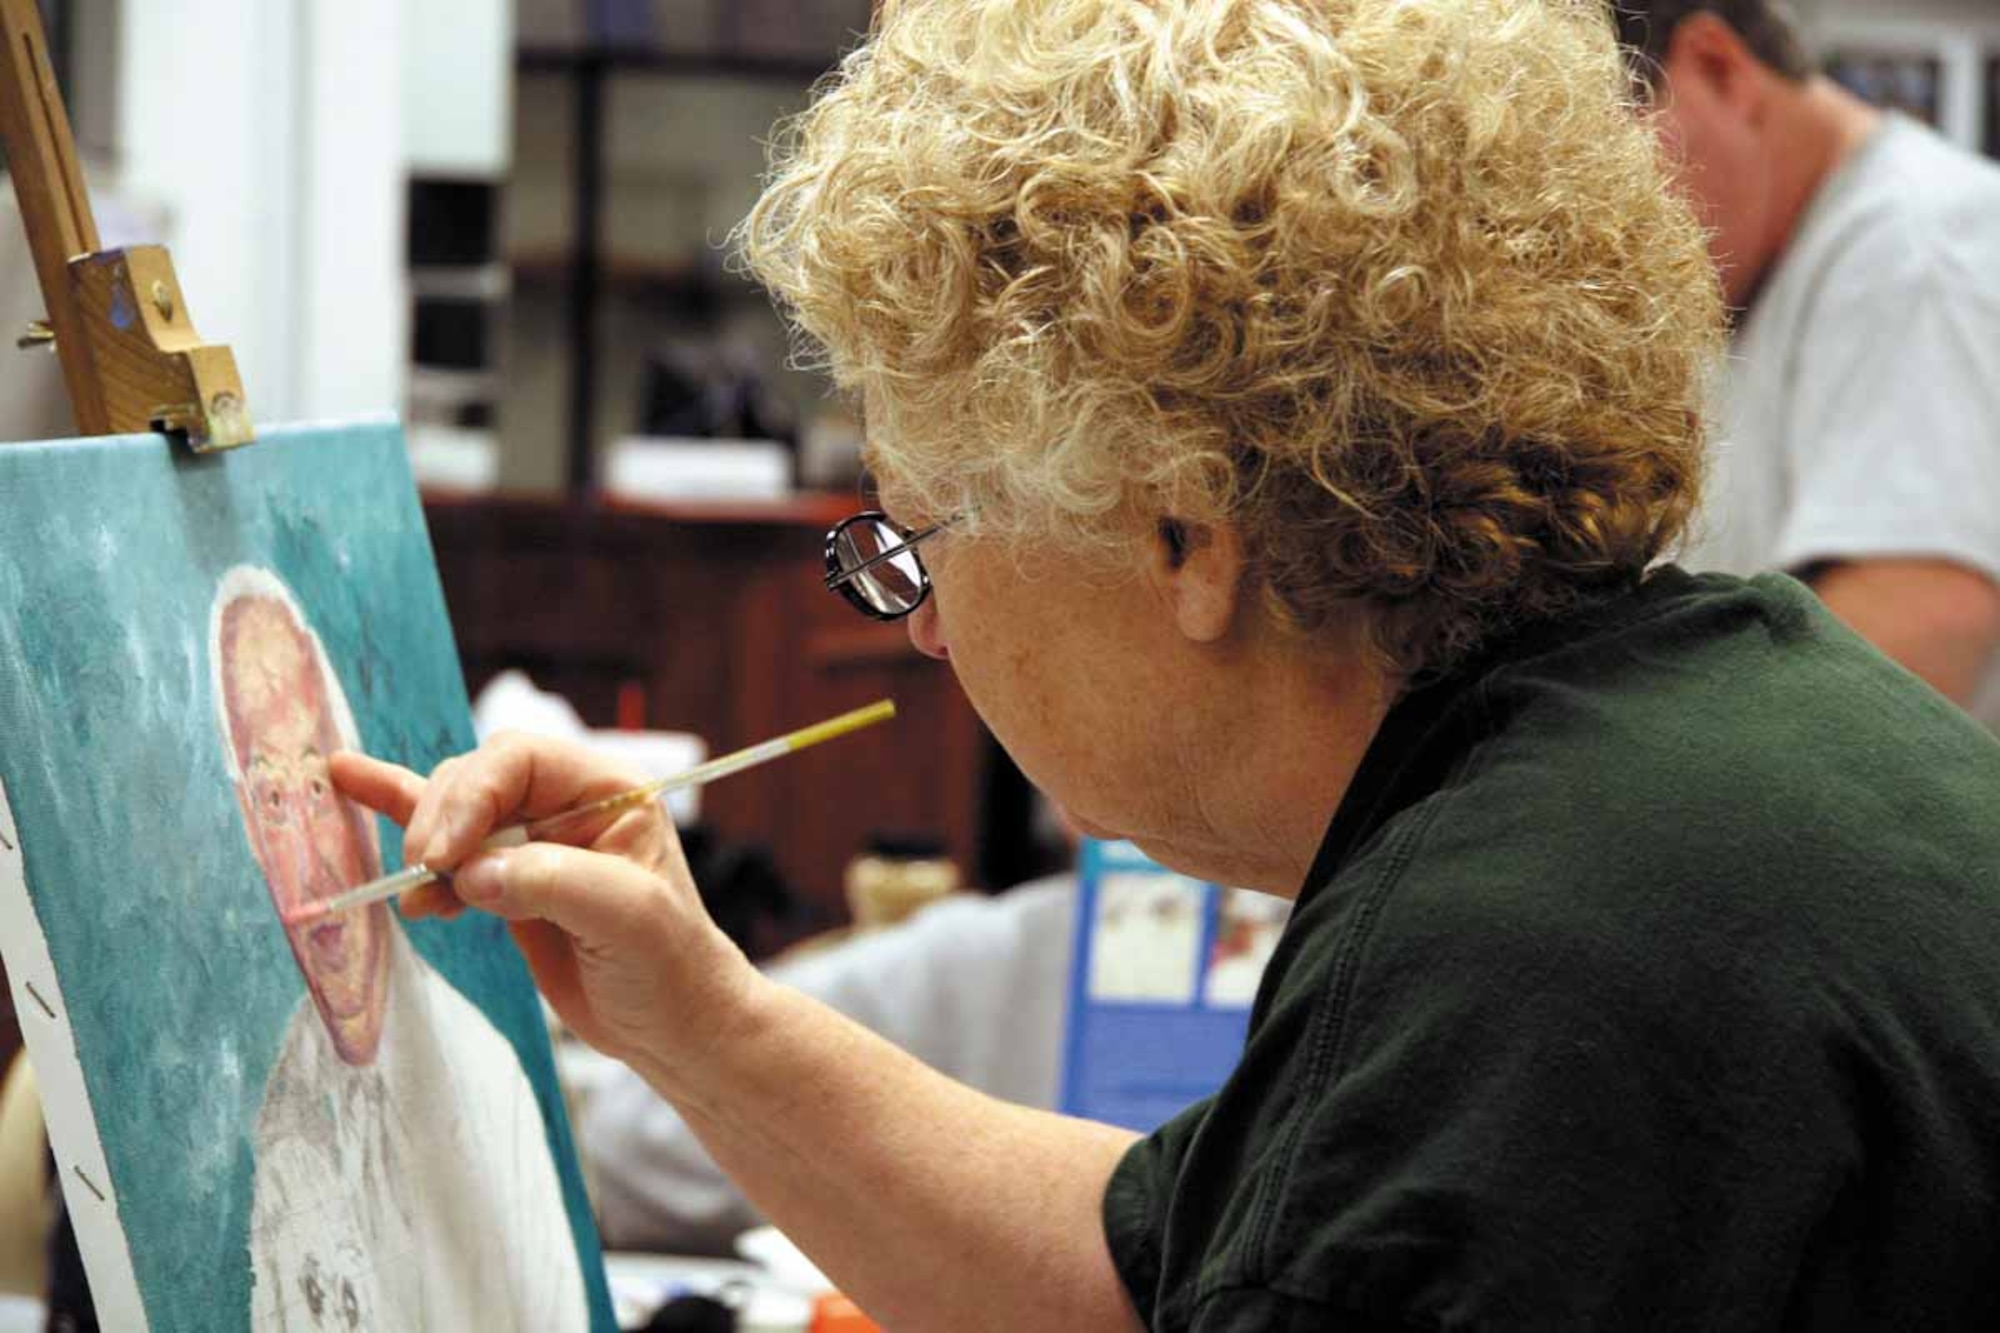 Janet Sherry will demonstrate what she has learned in drawing and painting classes at the Arts and Crafts Center. Sherry is an art student under the direction of artist Gaylon Thompson.  (Air Force photo by Becky Pillifant)